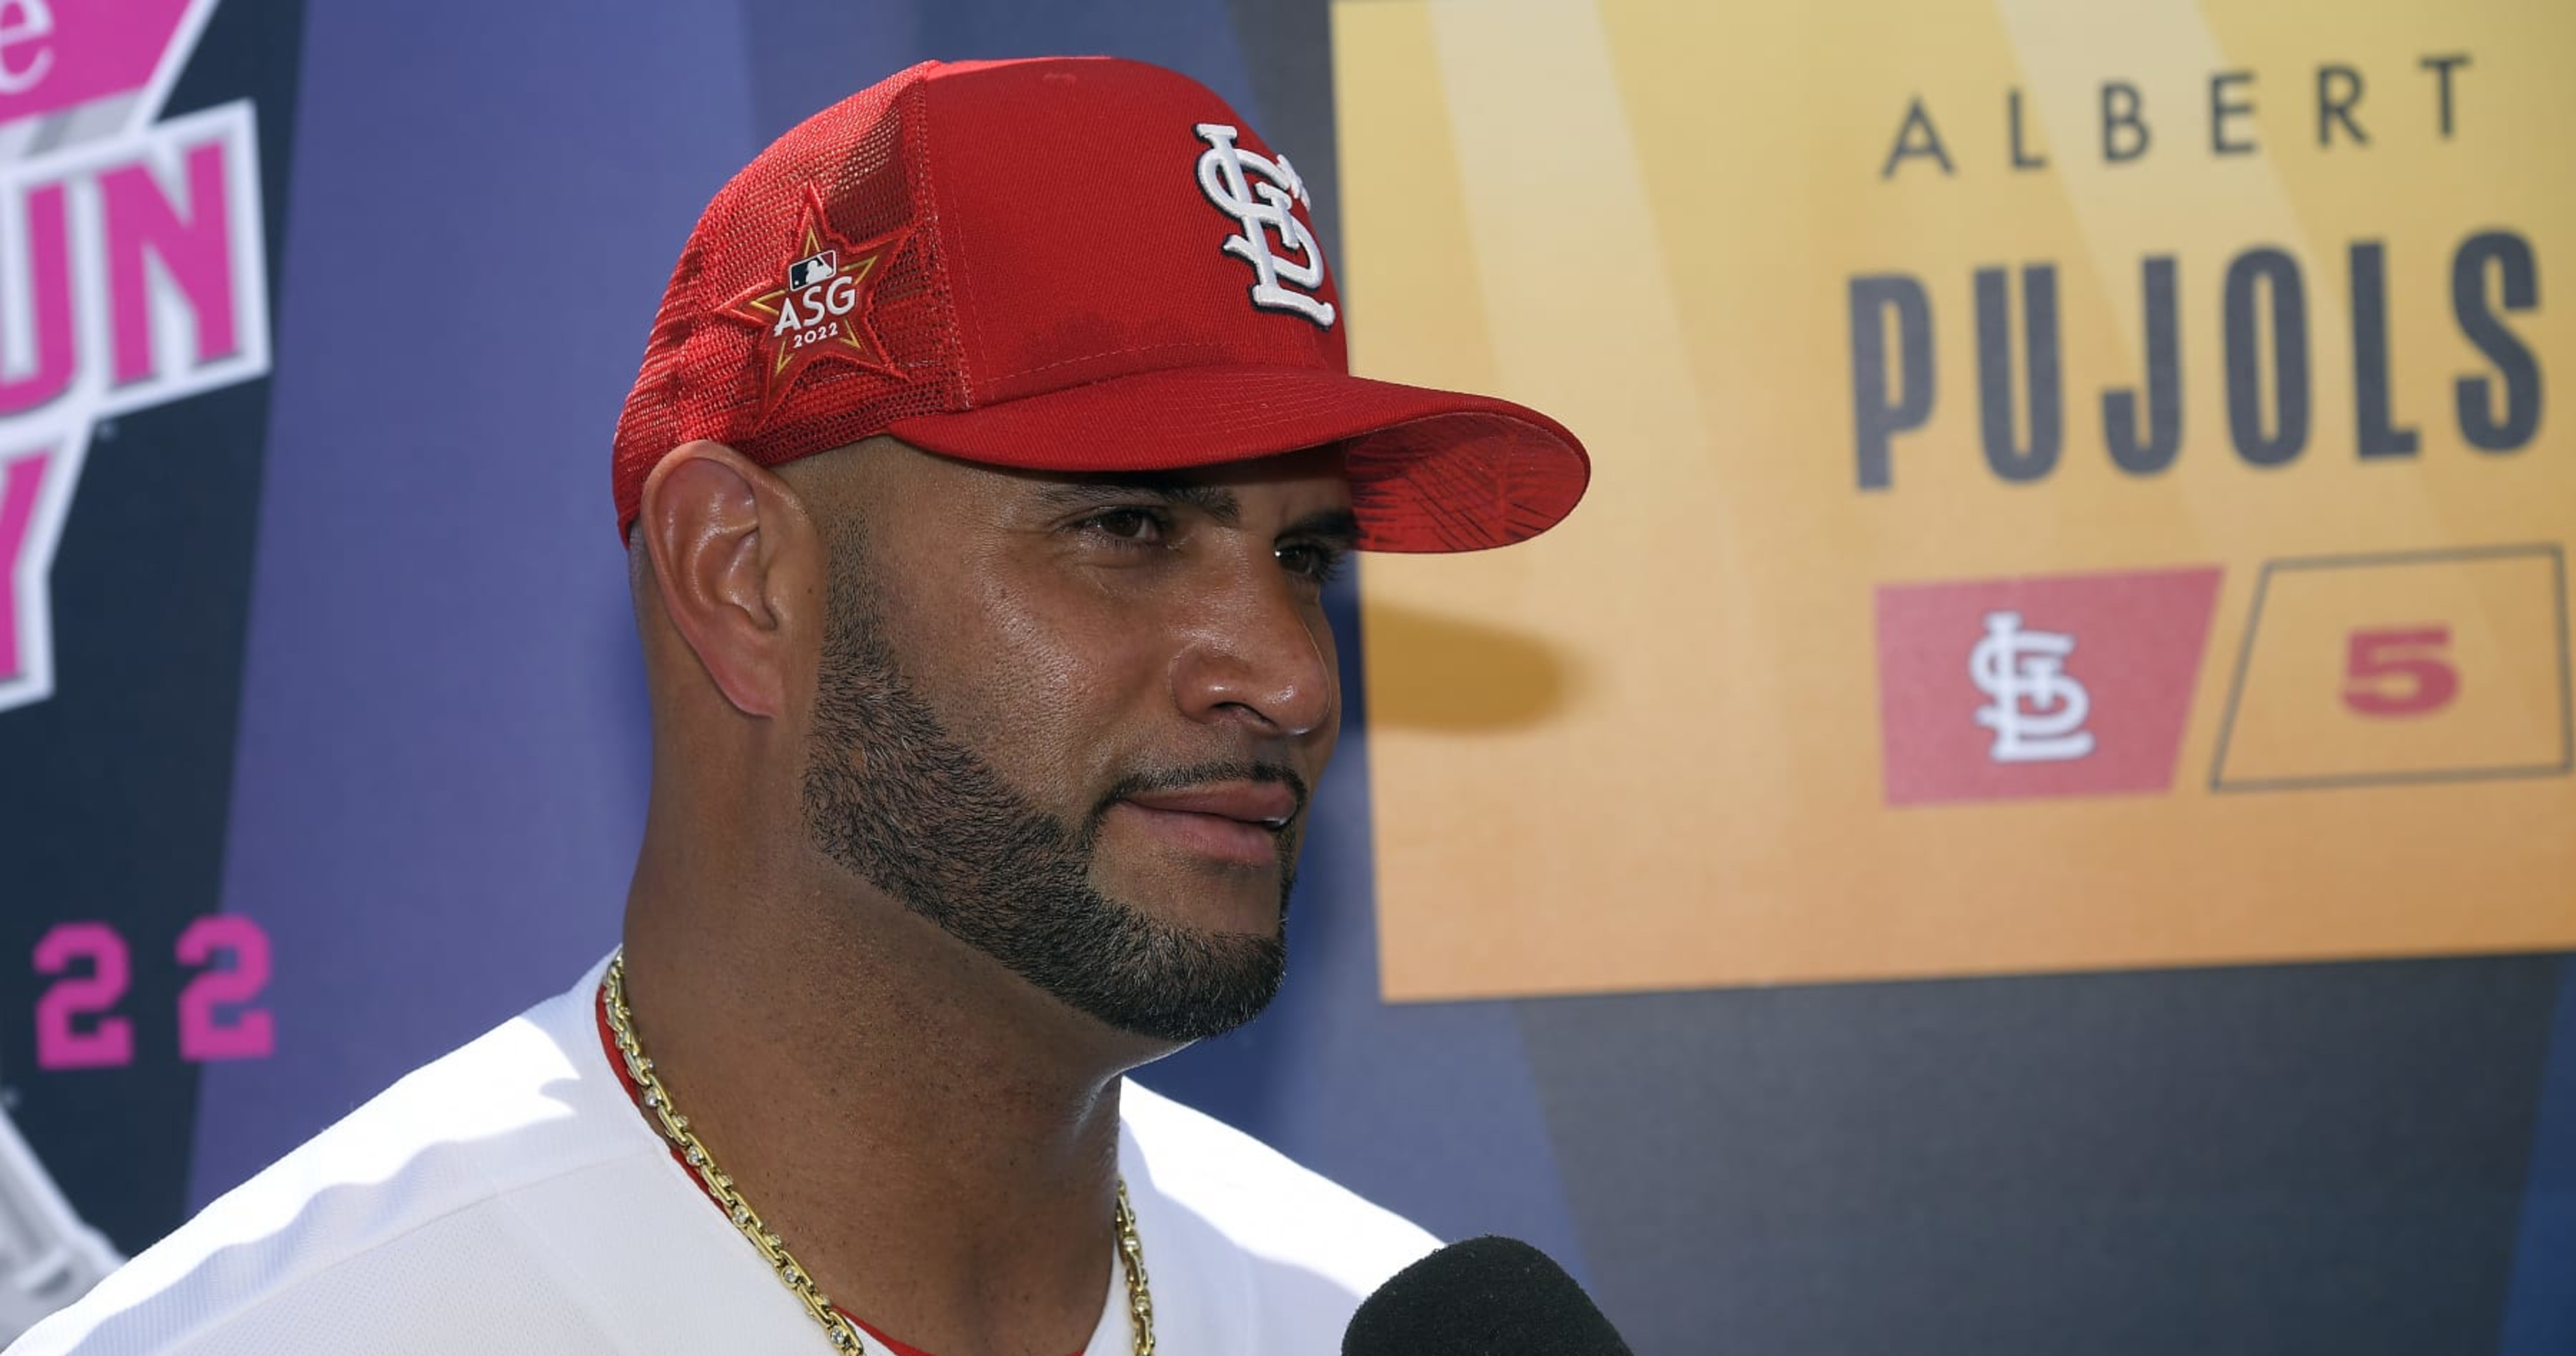 Goold: How will Pujols cap off his Hall of Fame career?